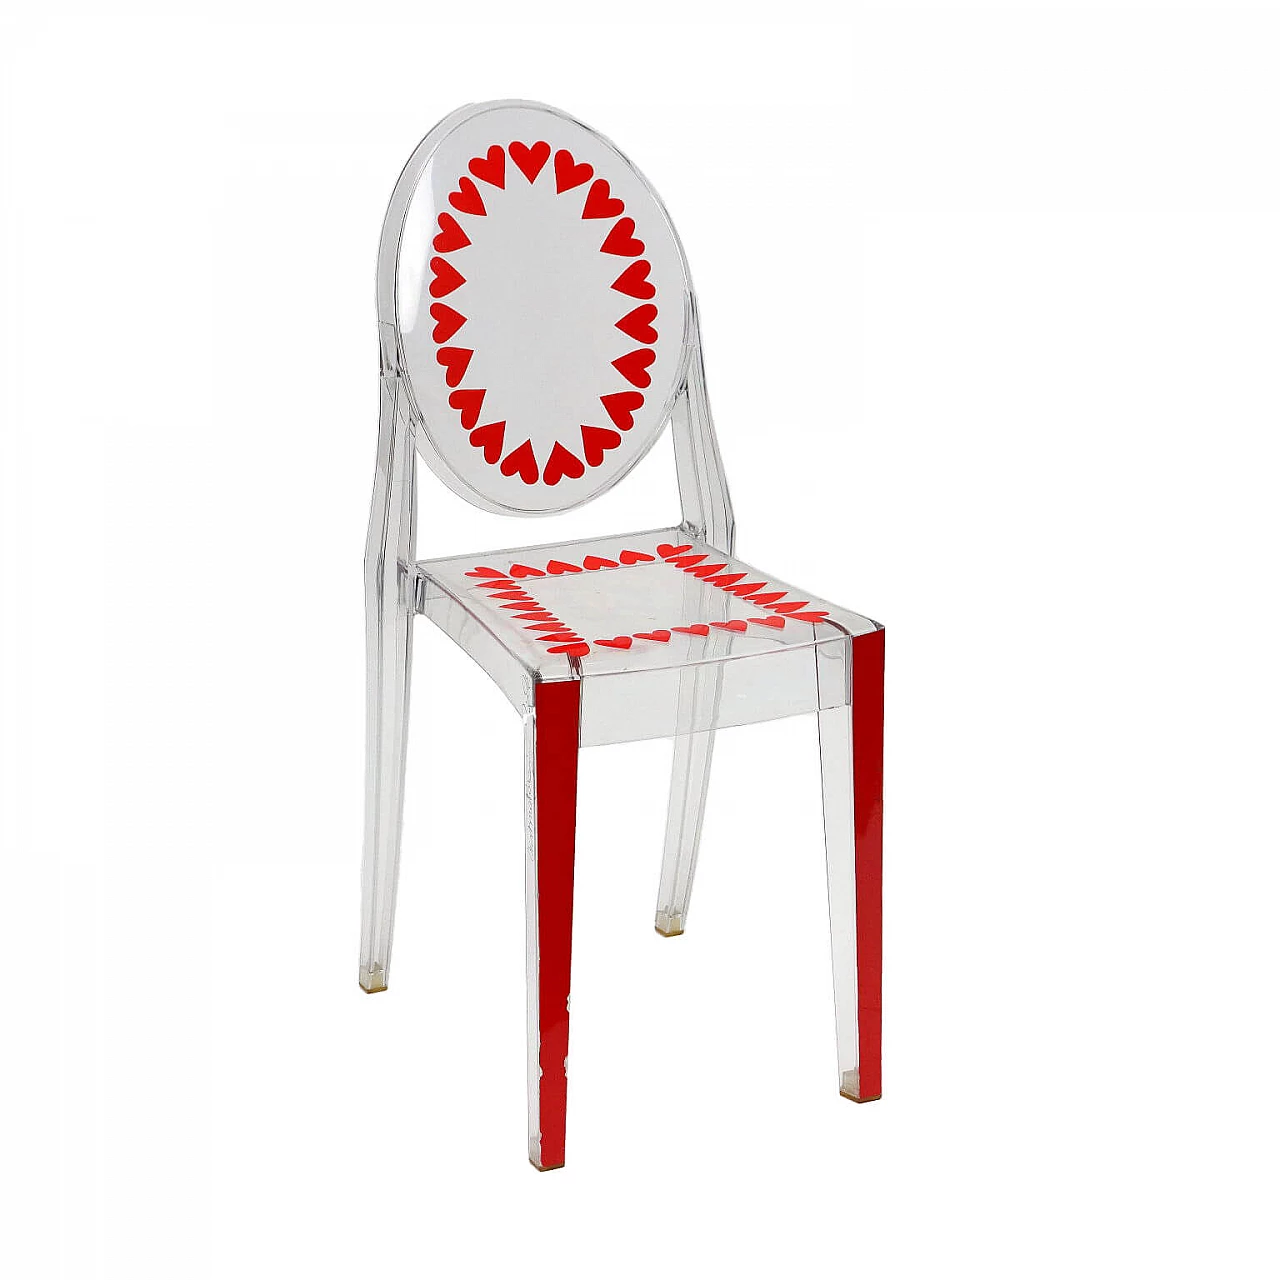 Victoria Ghost chair in polycarbonate by Philippe Starck for Kartell 1